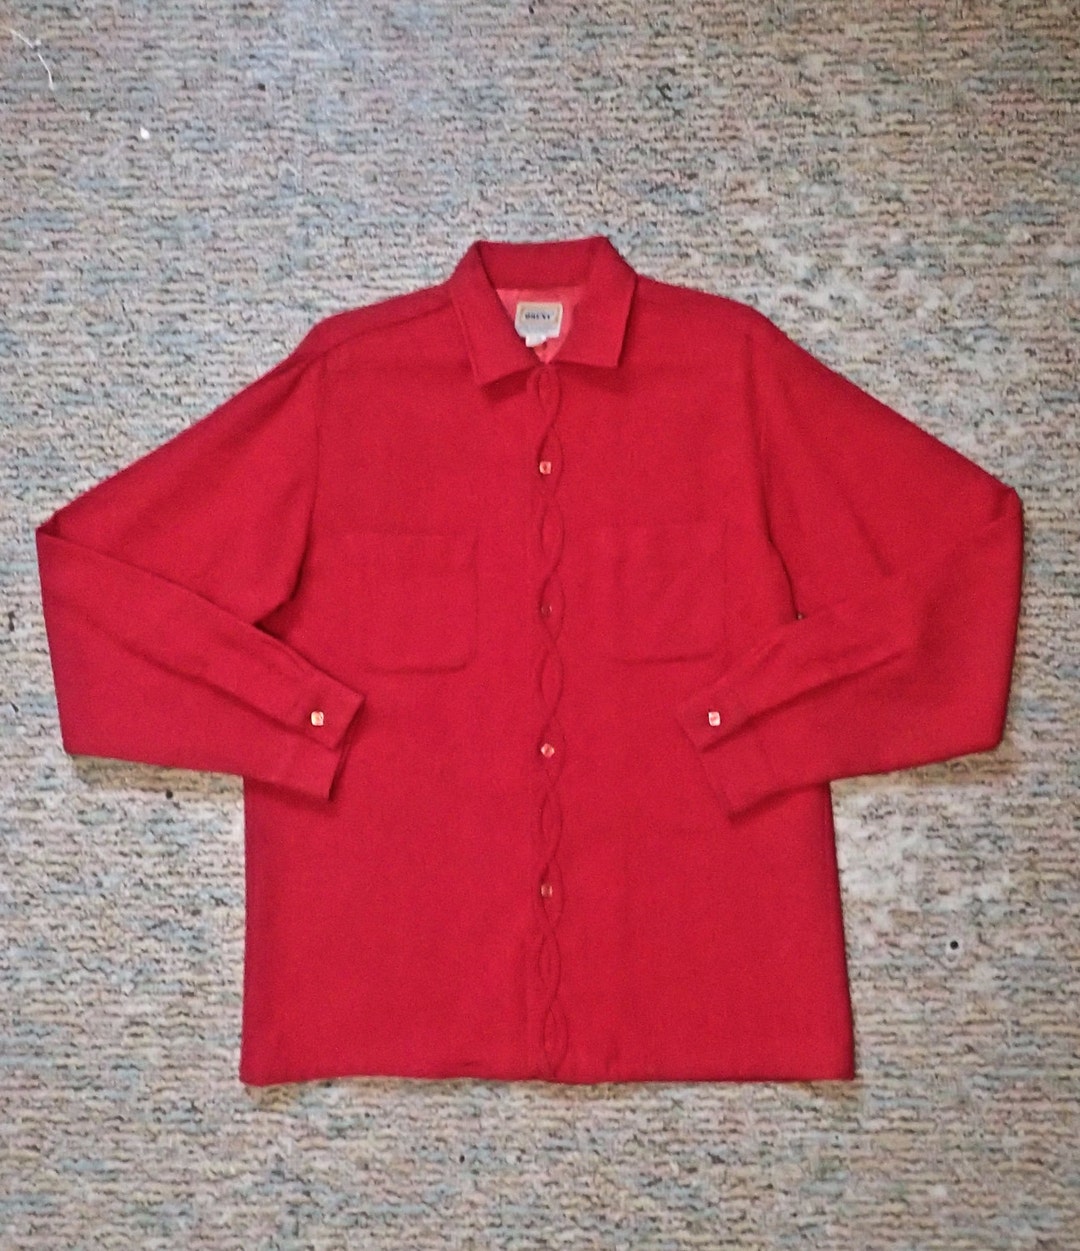 Handsome Vintage 1950's Bright Red BRENT Man's Wool - Etsy